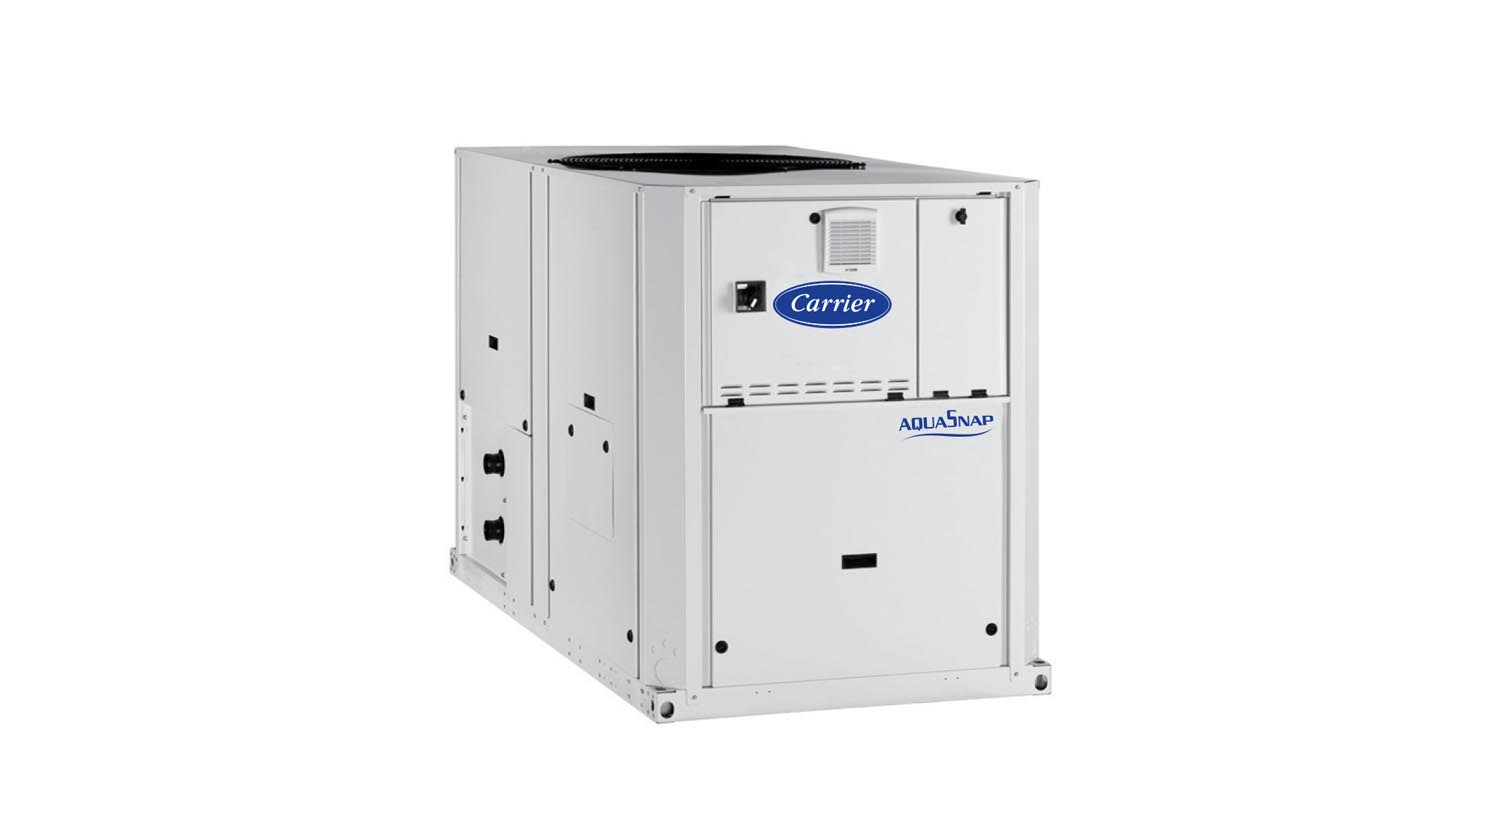 Carrier Aquasnap Chillers	